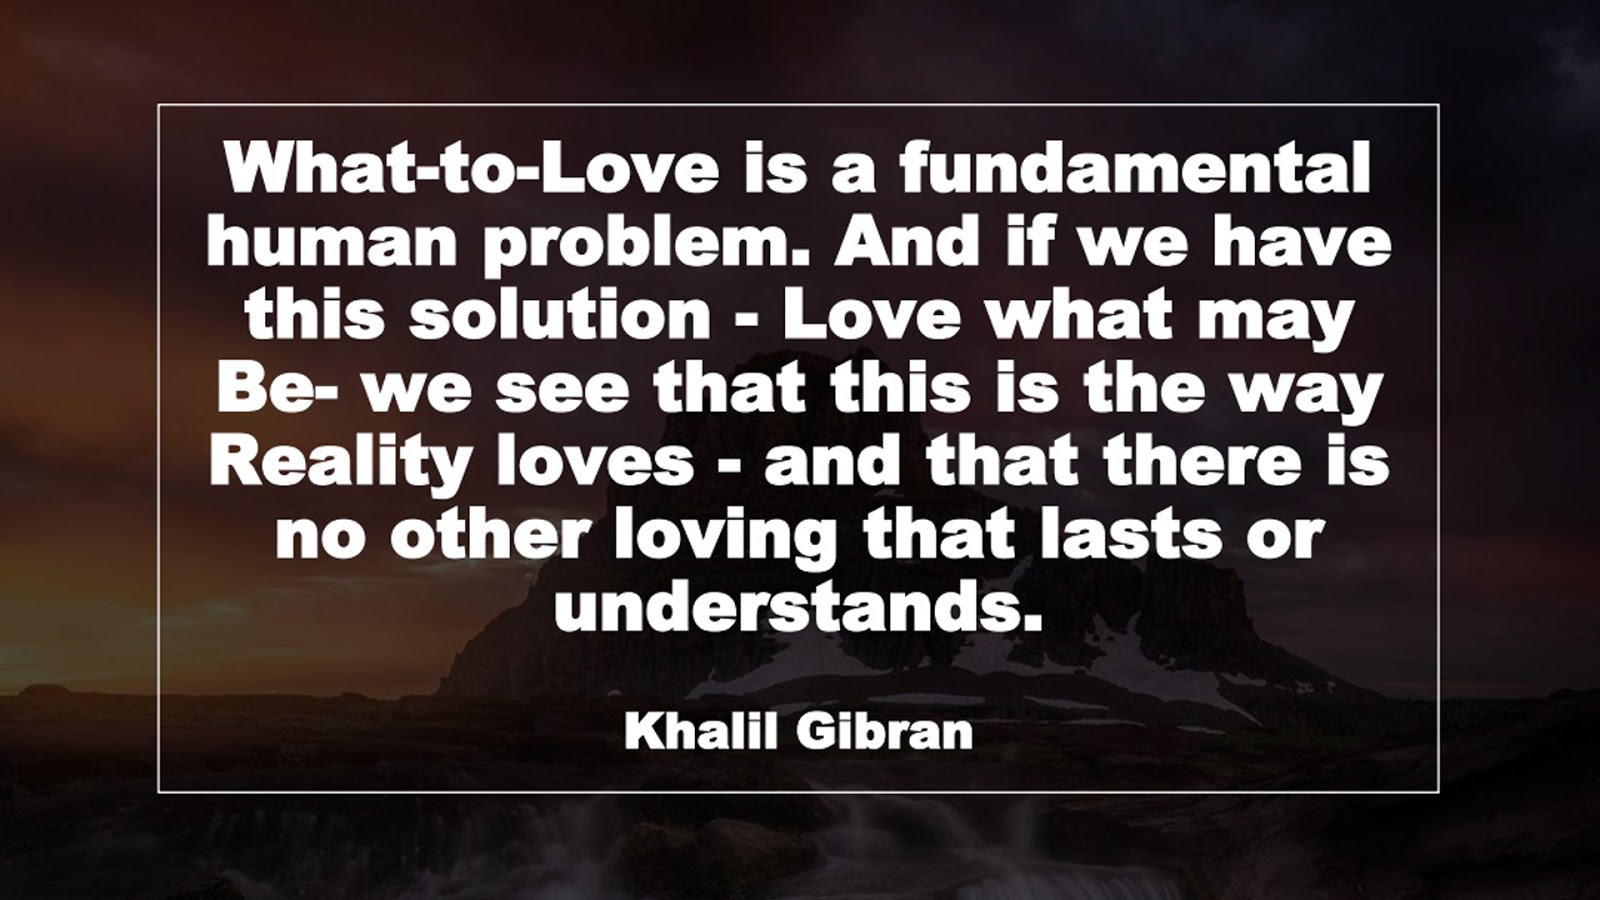 What-to-Love is a fundamental human problem. And if we have this solution - Love what may Be- we see that this is the way Reality loves - and that there is no other loving that lasts or understands. (Khalil Gibran)